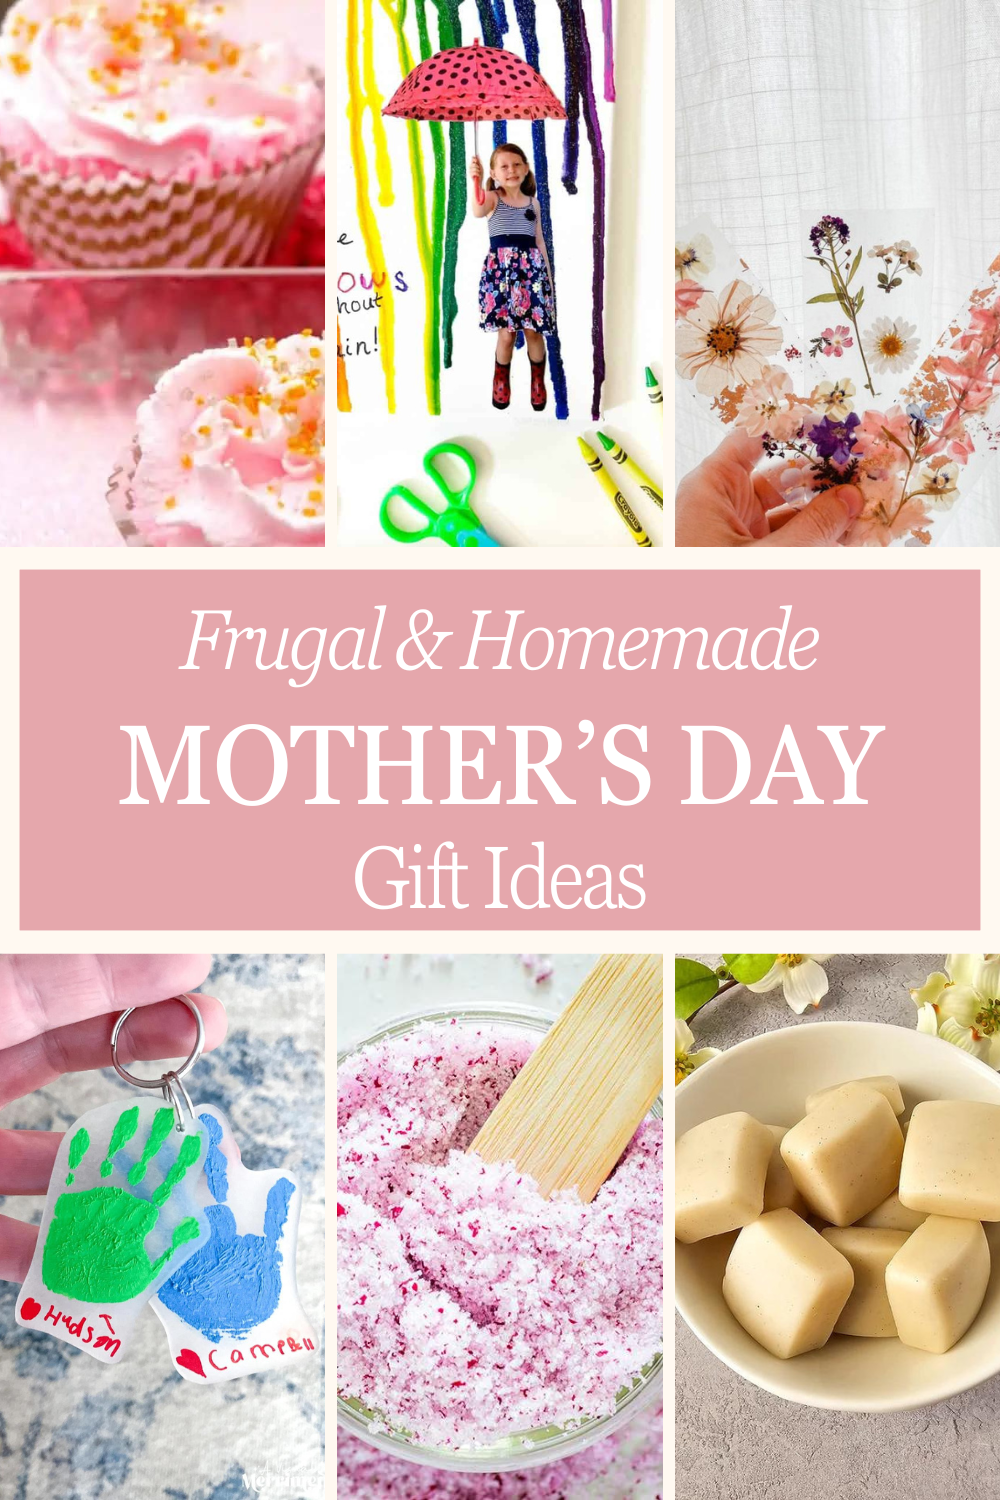 Frugal Homemade Mother’s Day Gift Ideas She’ll Love